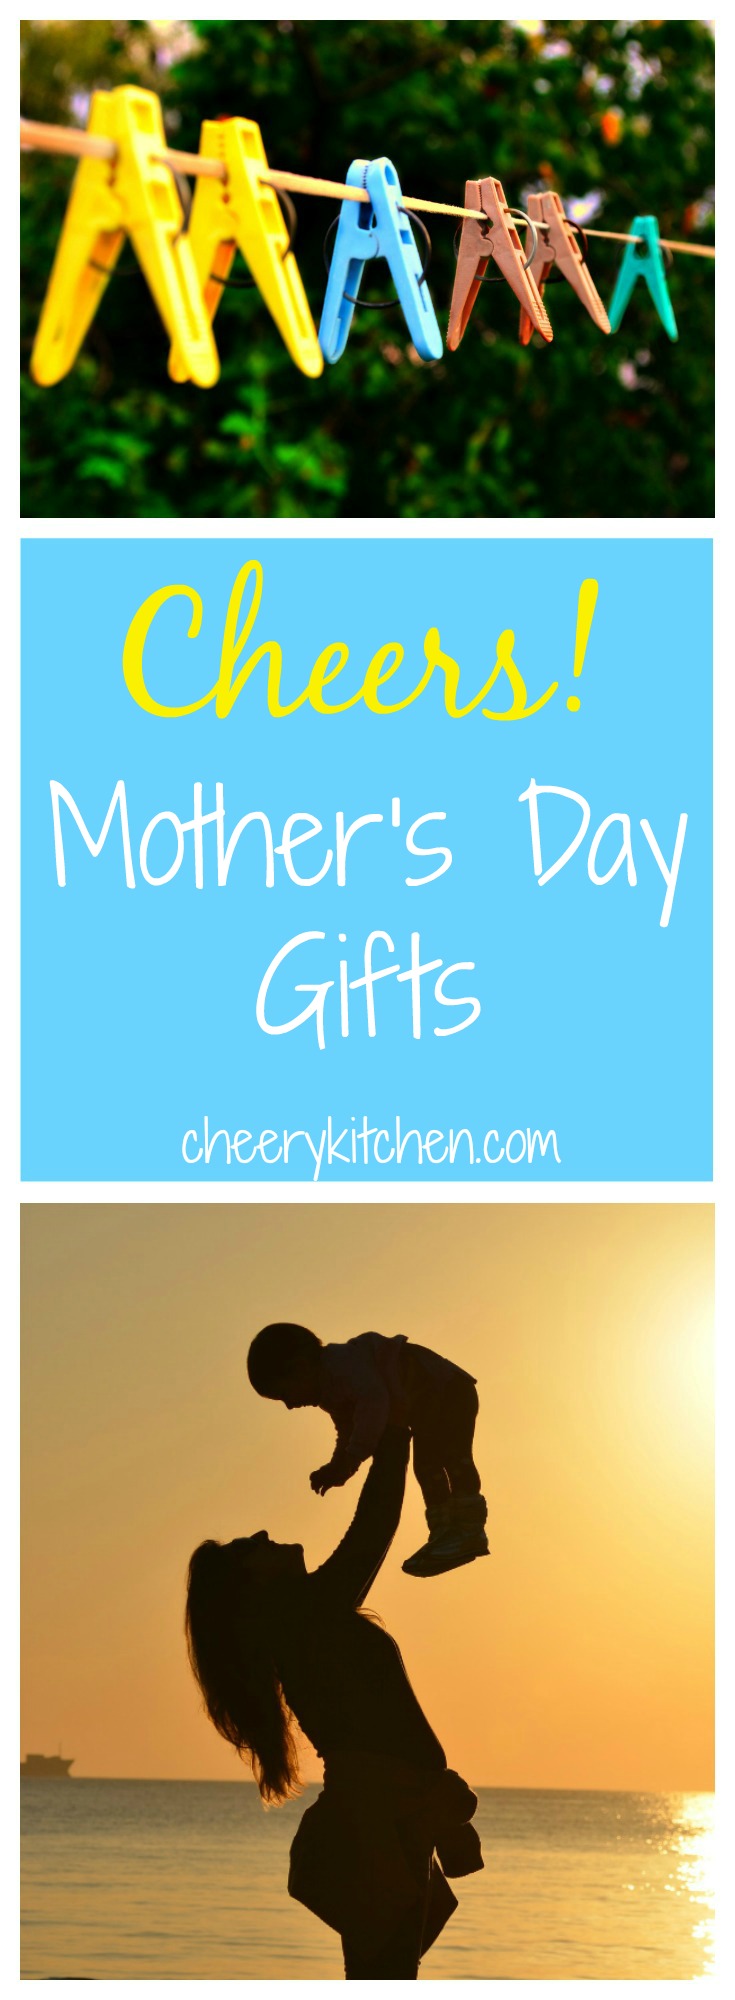 Become your mom's favorite child with this list of Mother's Day gifts that your mom ACTUALLY WANTS! Gift #1 is perfect and will dissolve her to tears!